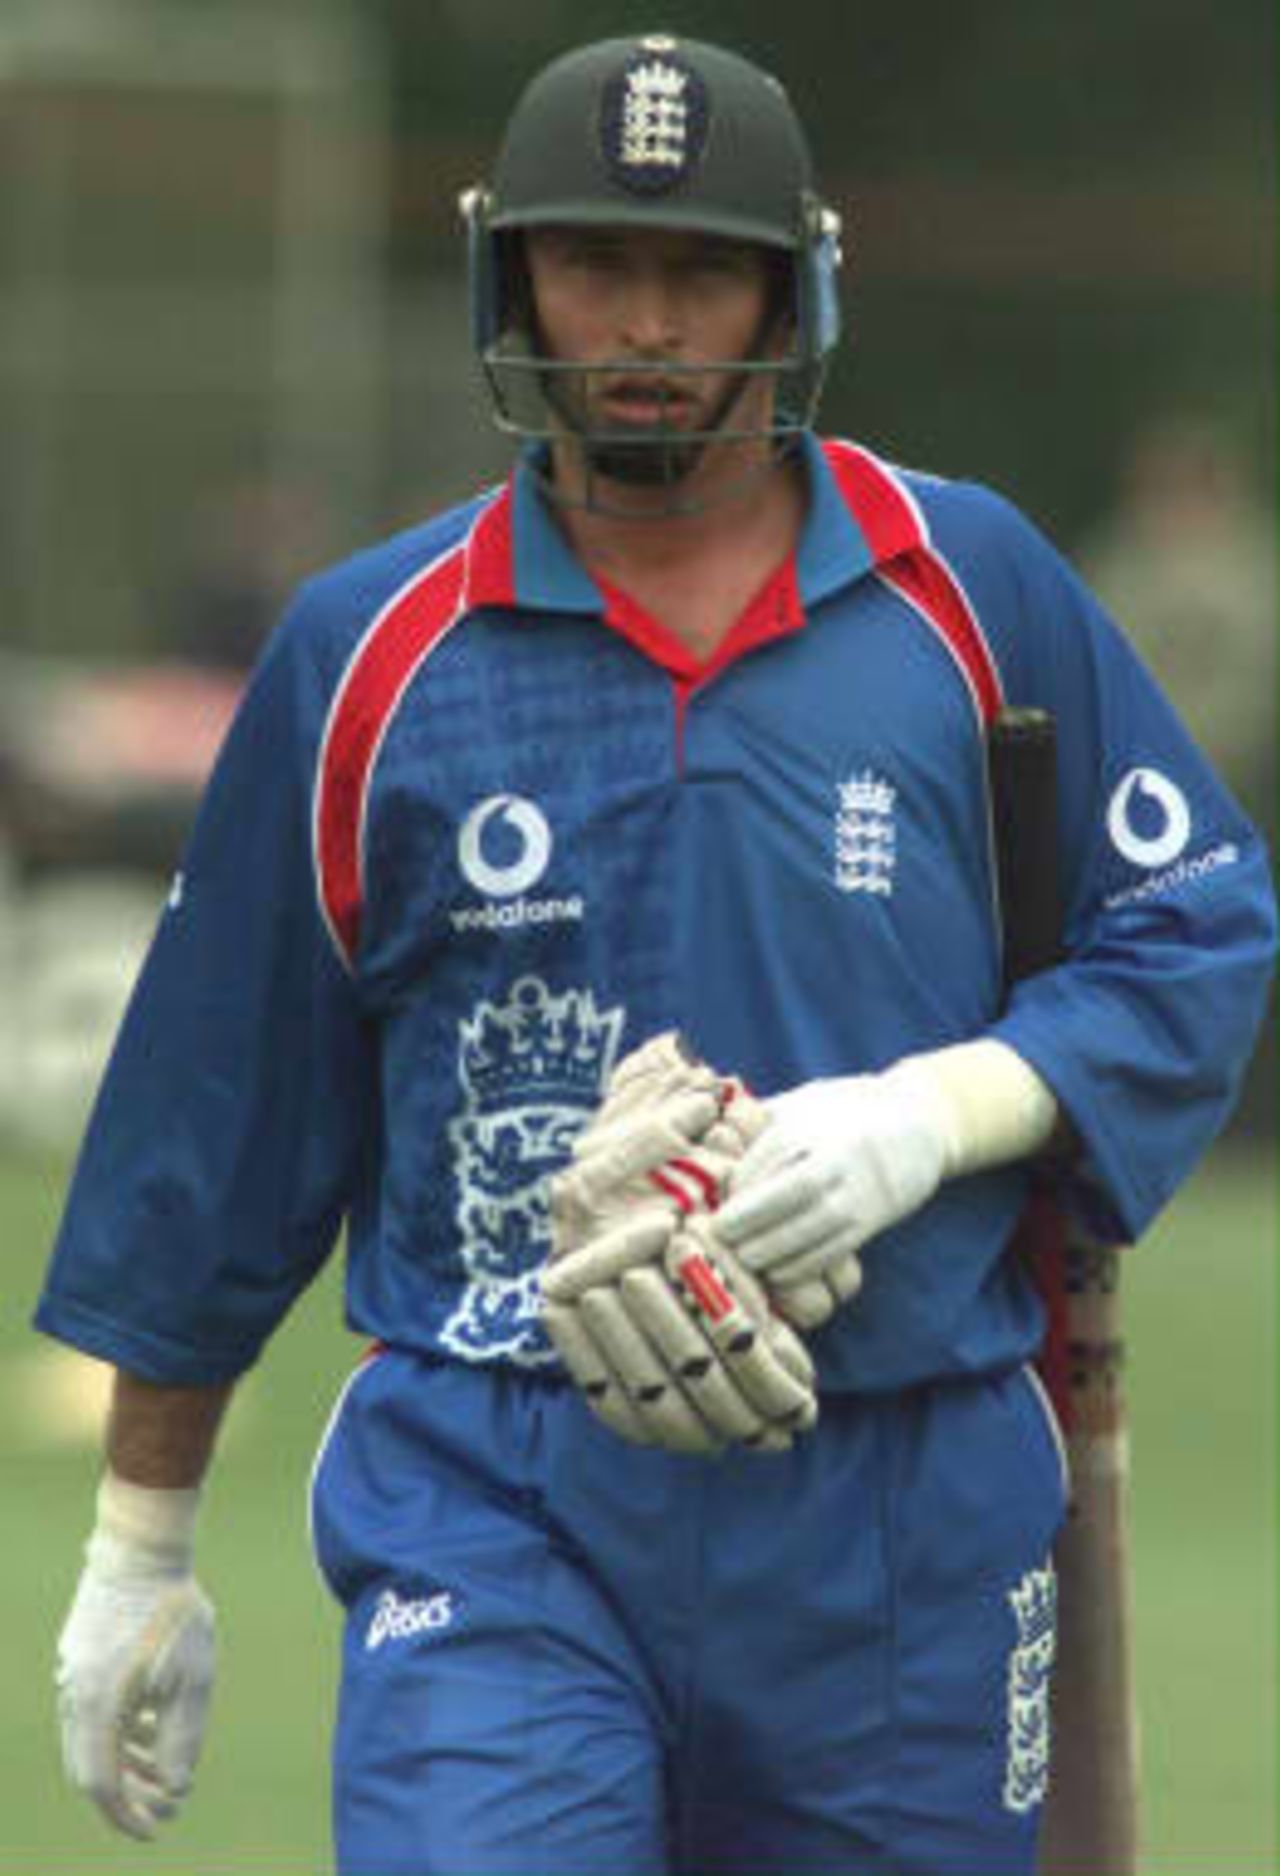 Nasser Hussain returns to the pavillion - England - Kent World Cup warm up game, 7 May 1999